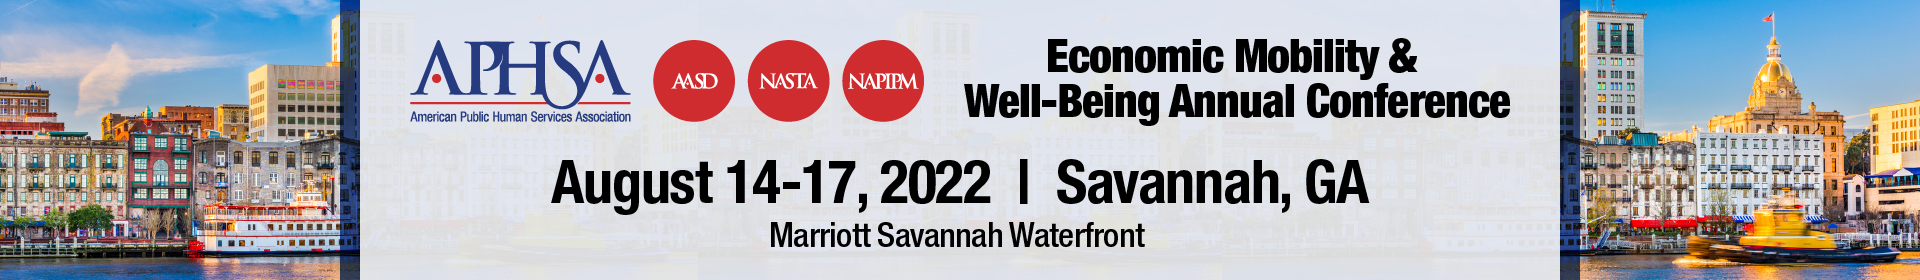 Economic Mobility & Well-Being Conference Event Banner